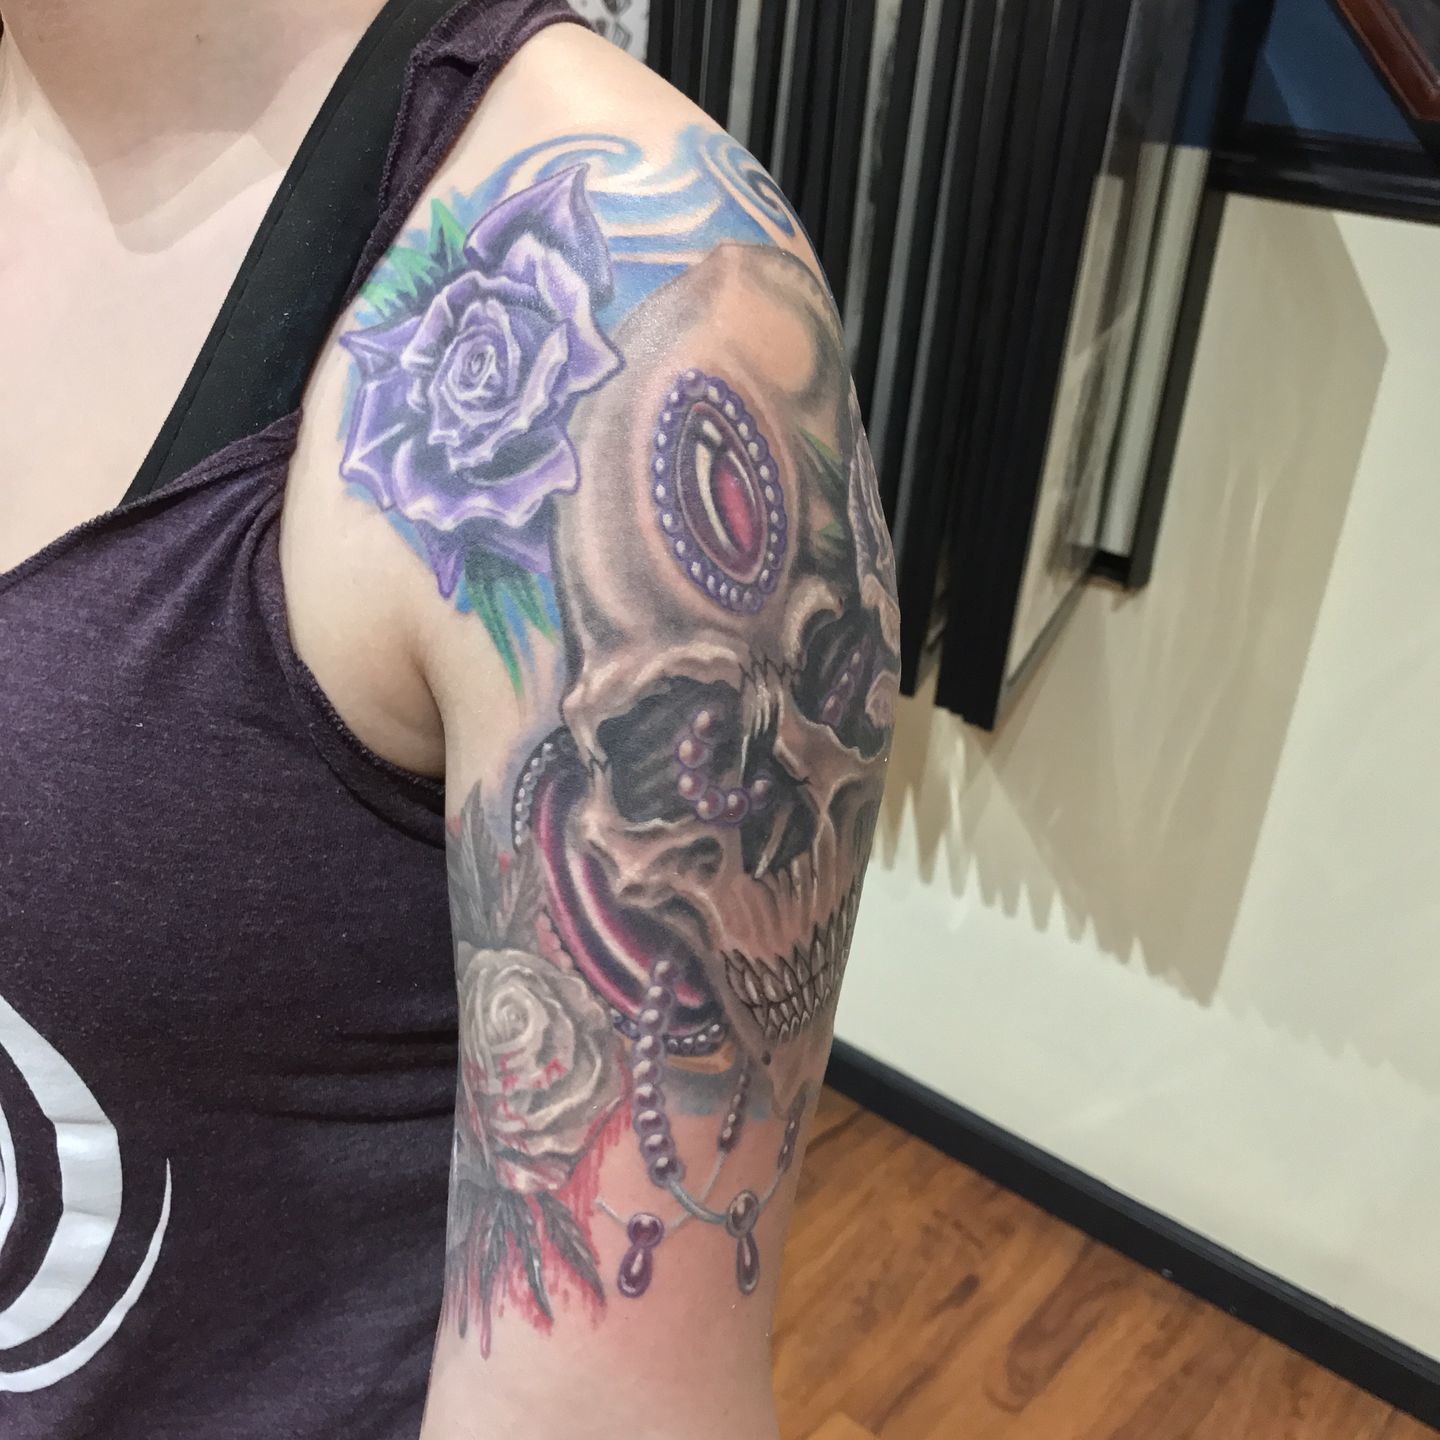 Sleeve Tattoos – Best Tattoo Shop In NYC | New York City Rooftop |  Inknation Studio